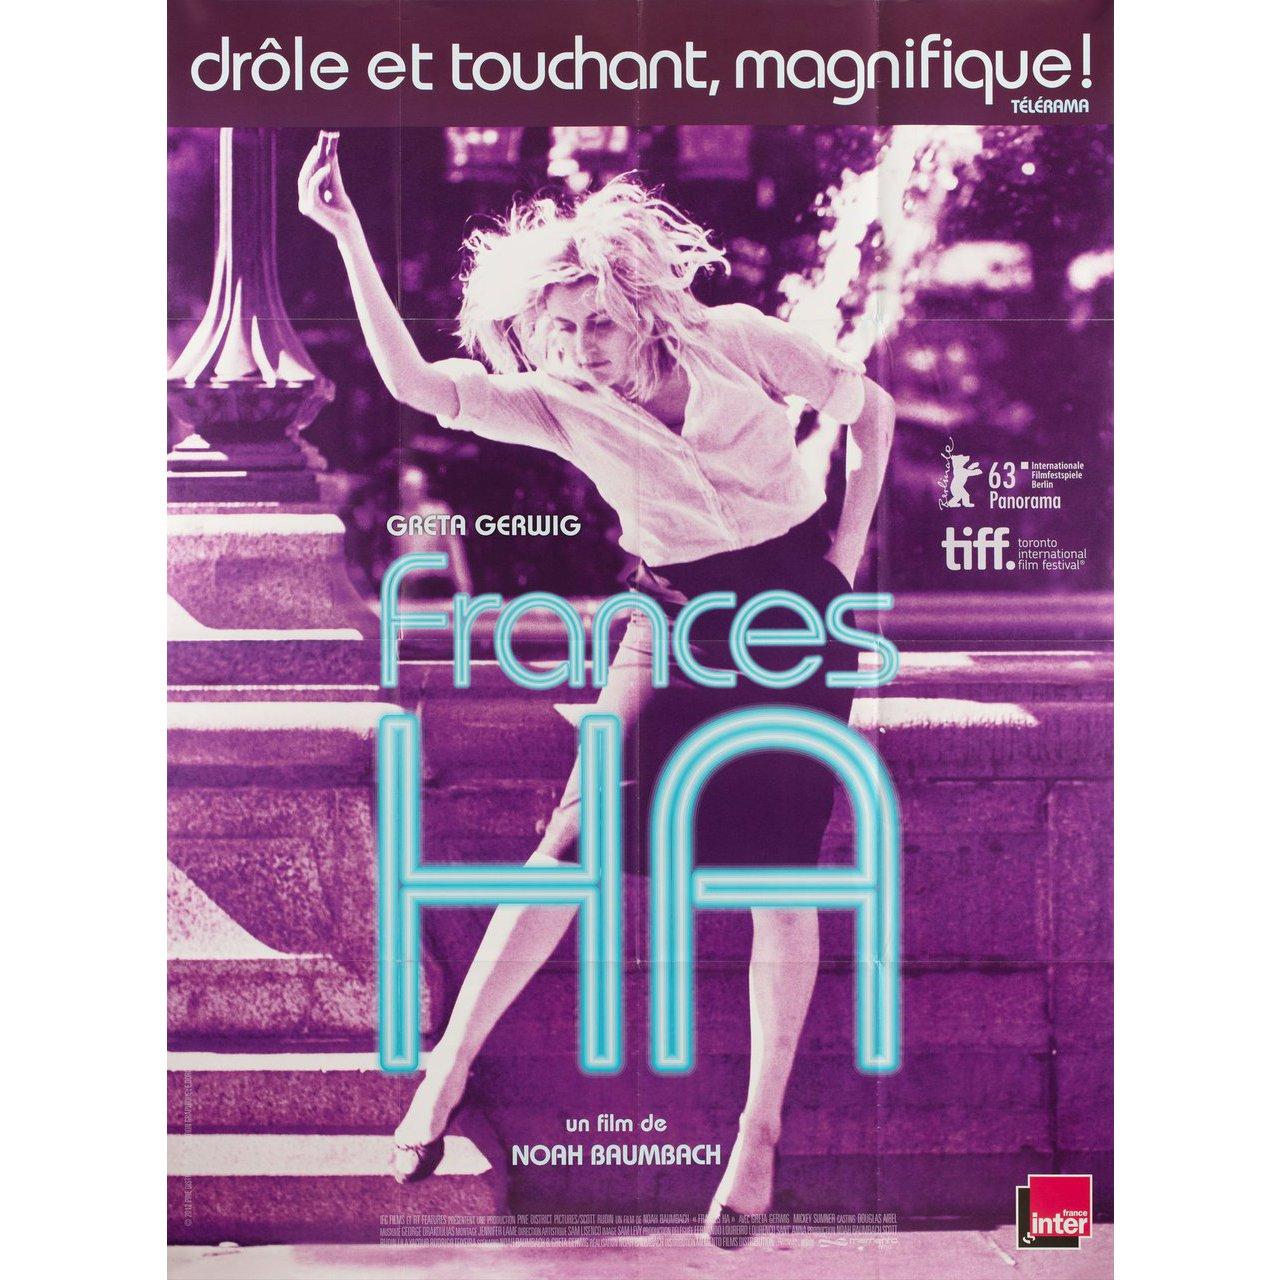 Original 2013 French grande poster for the film Frances Ha directed by Noah Baumbach with Greta Gerwig / Mickey Sumner / Michael Esper / Adam Driver. Very Good-Fine condition, folded. Many original posters were issued folded or were subsequently